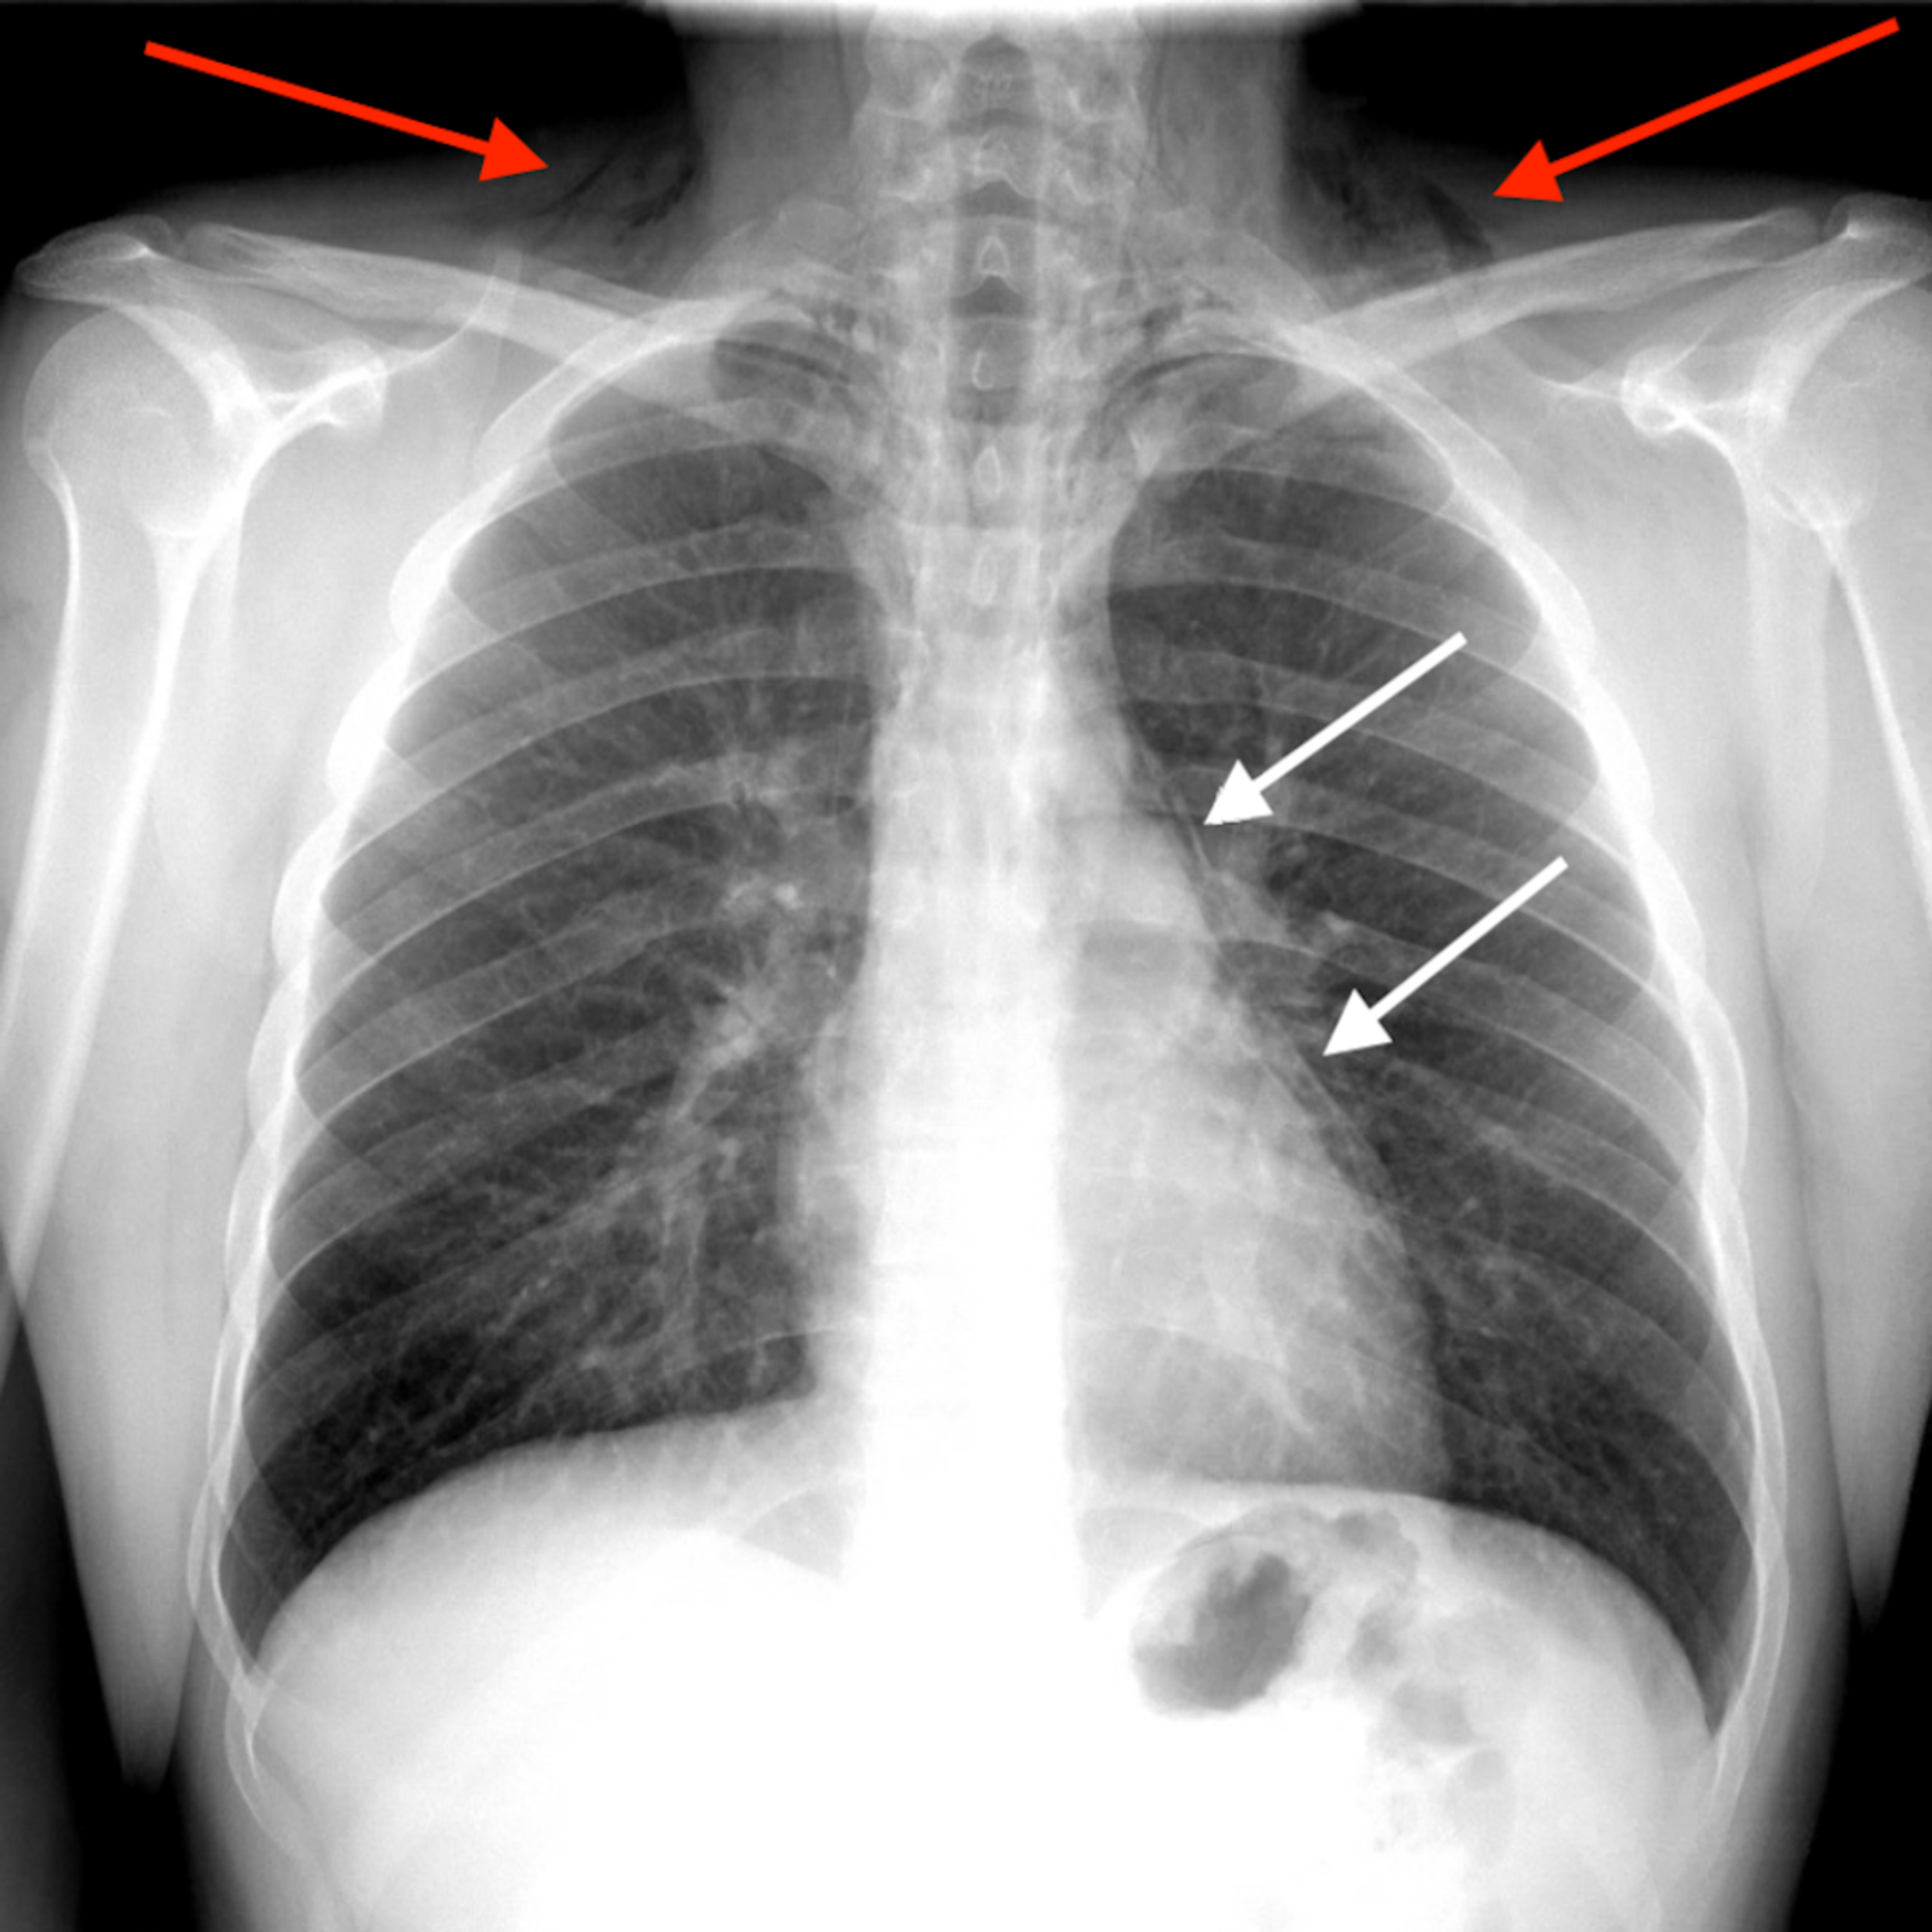 Chest X Ray With Pneumomediastinum And Subcutaneous Emphysema Arrows